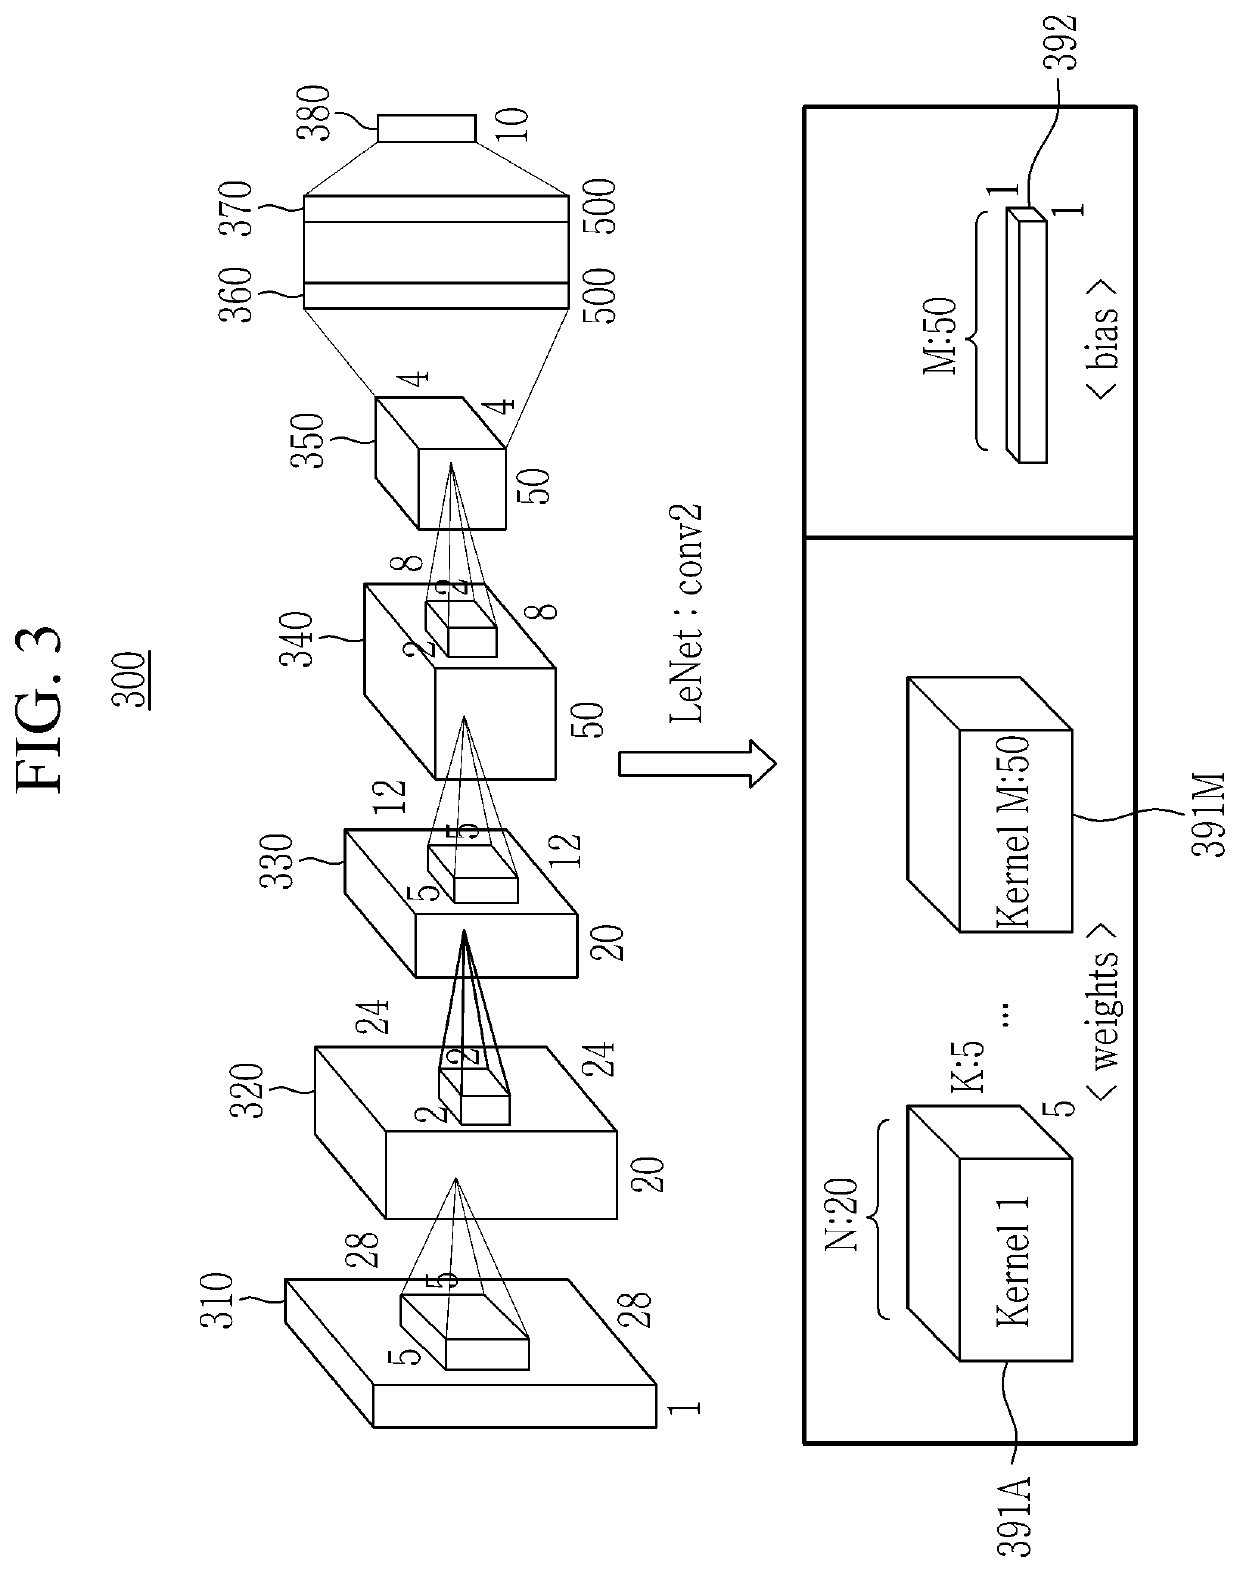 Neural network control device and method